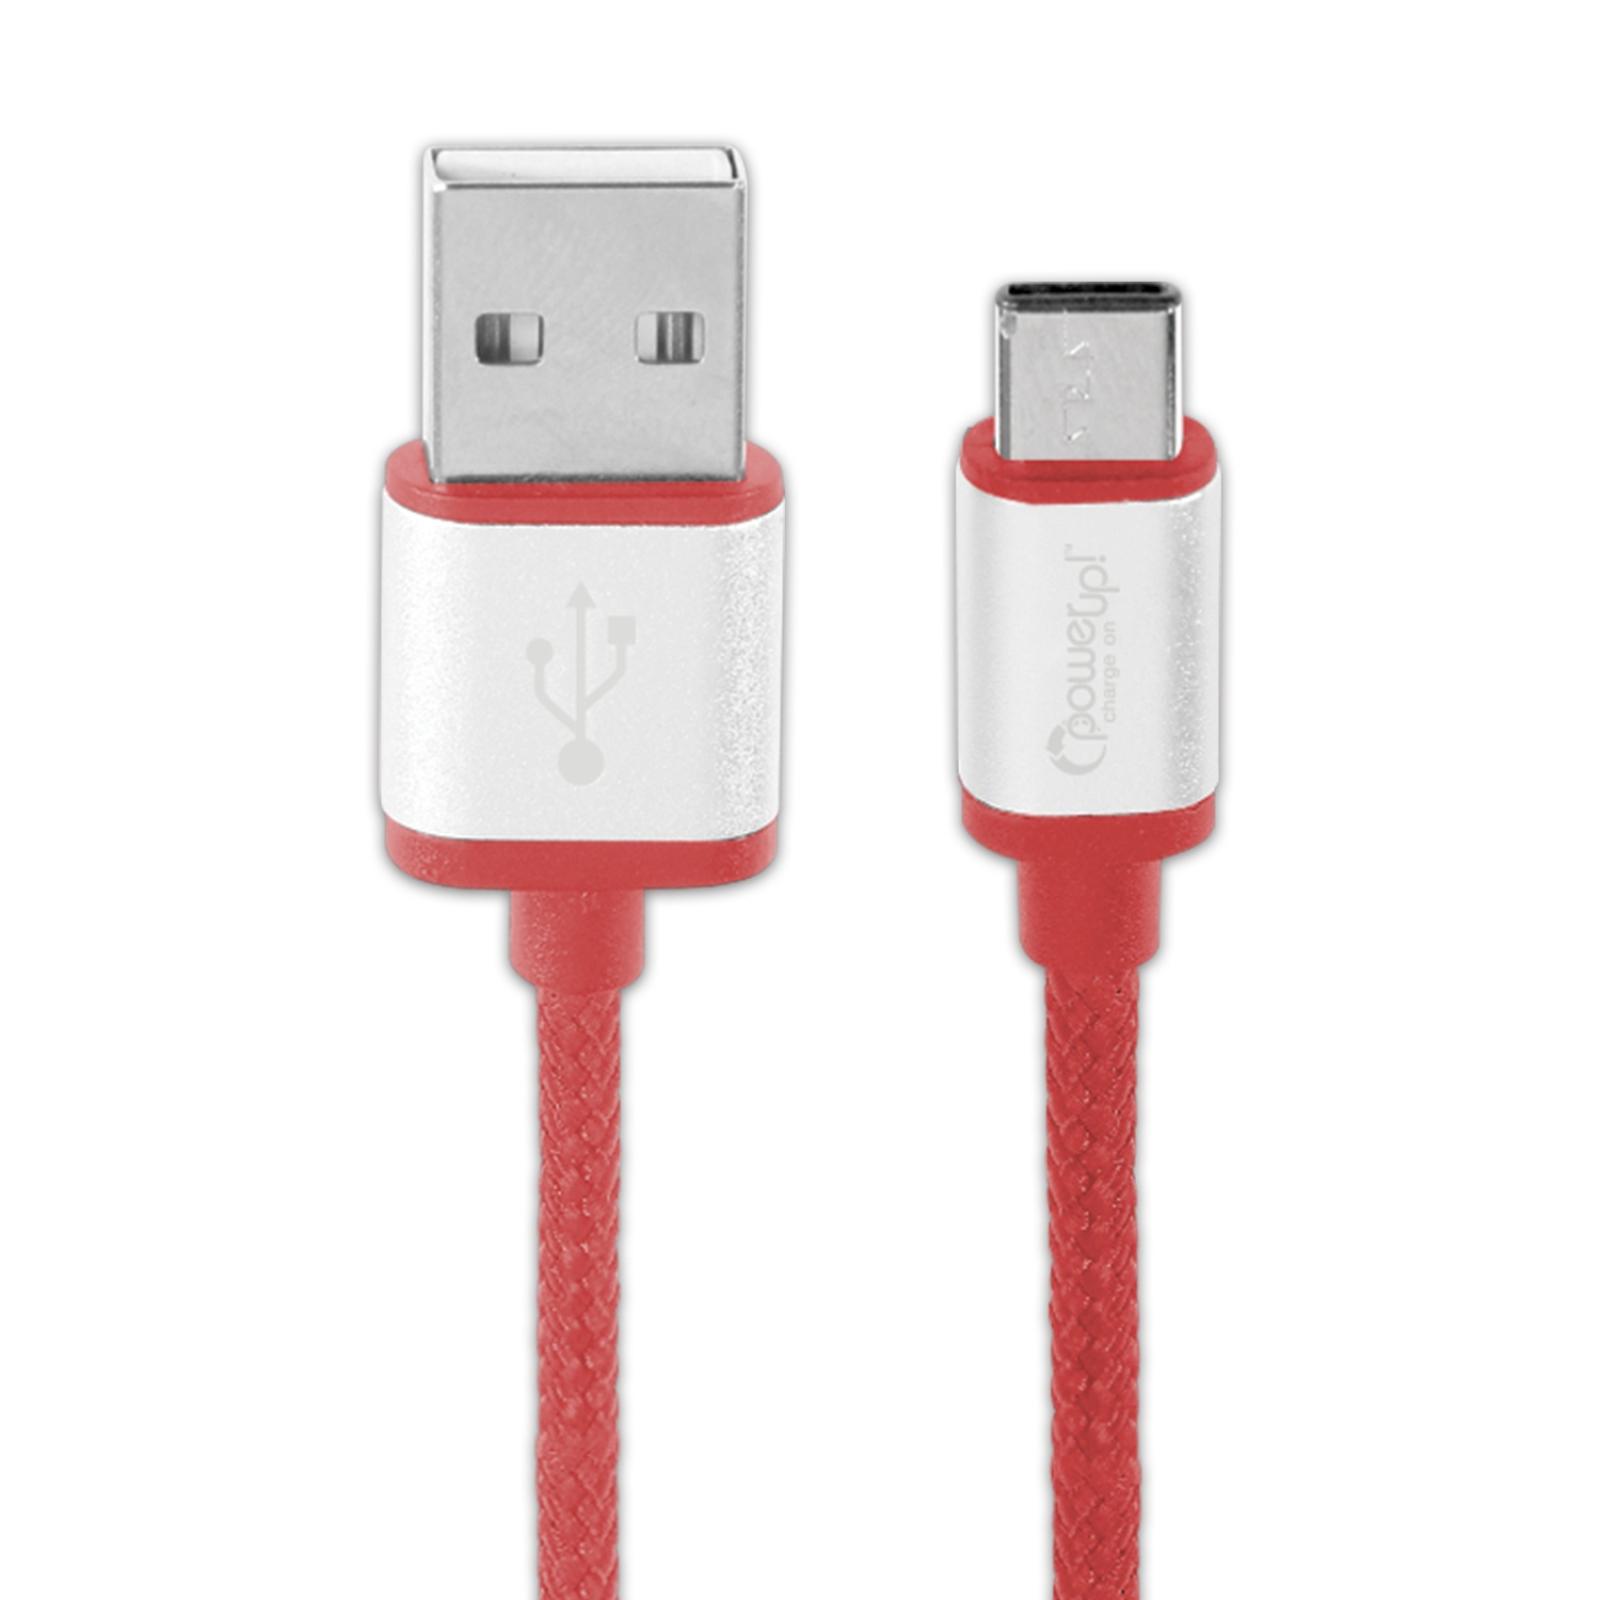 PowerUp! Charge On™ Braided Type C USB Cable